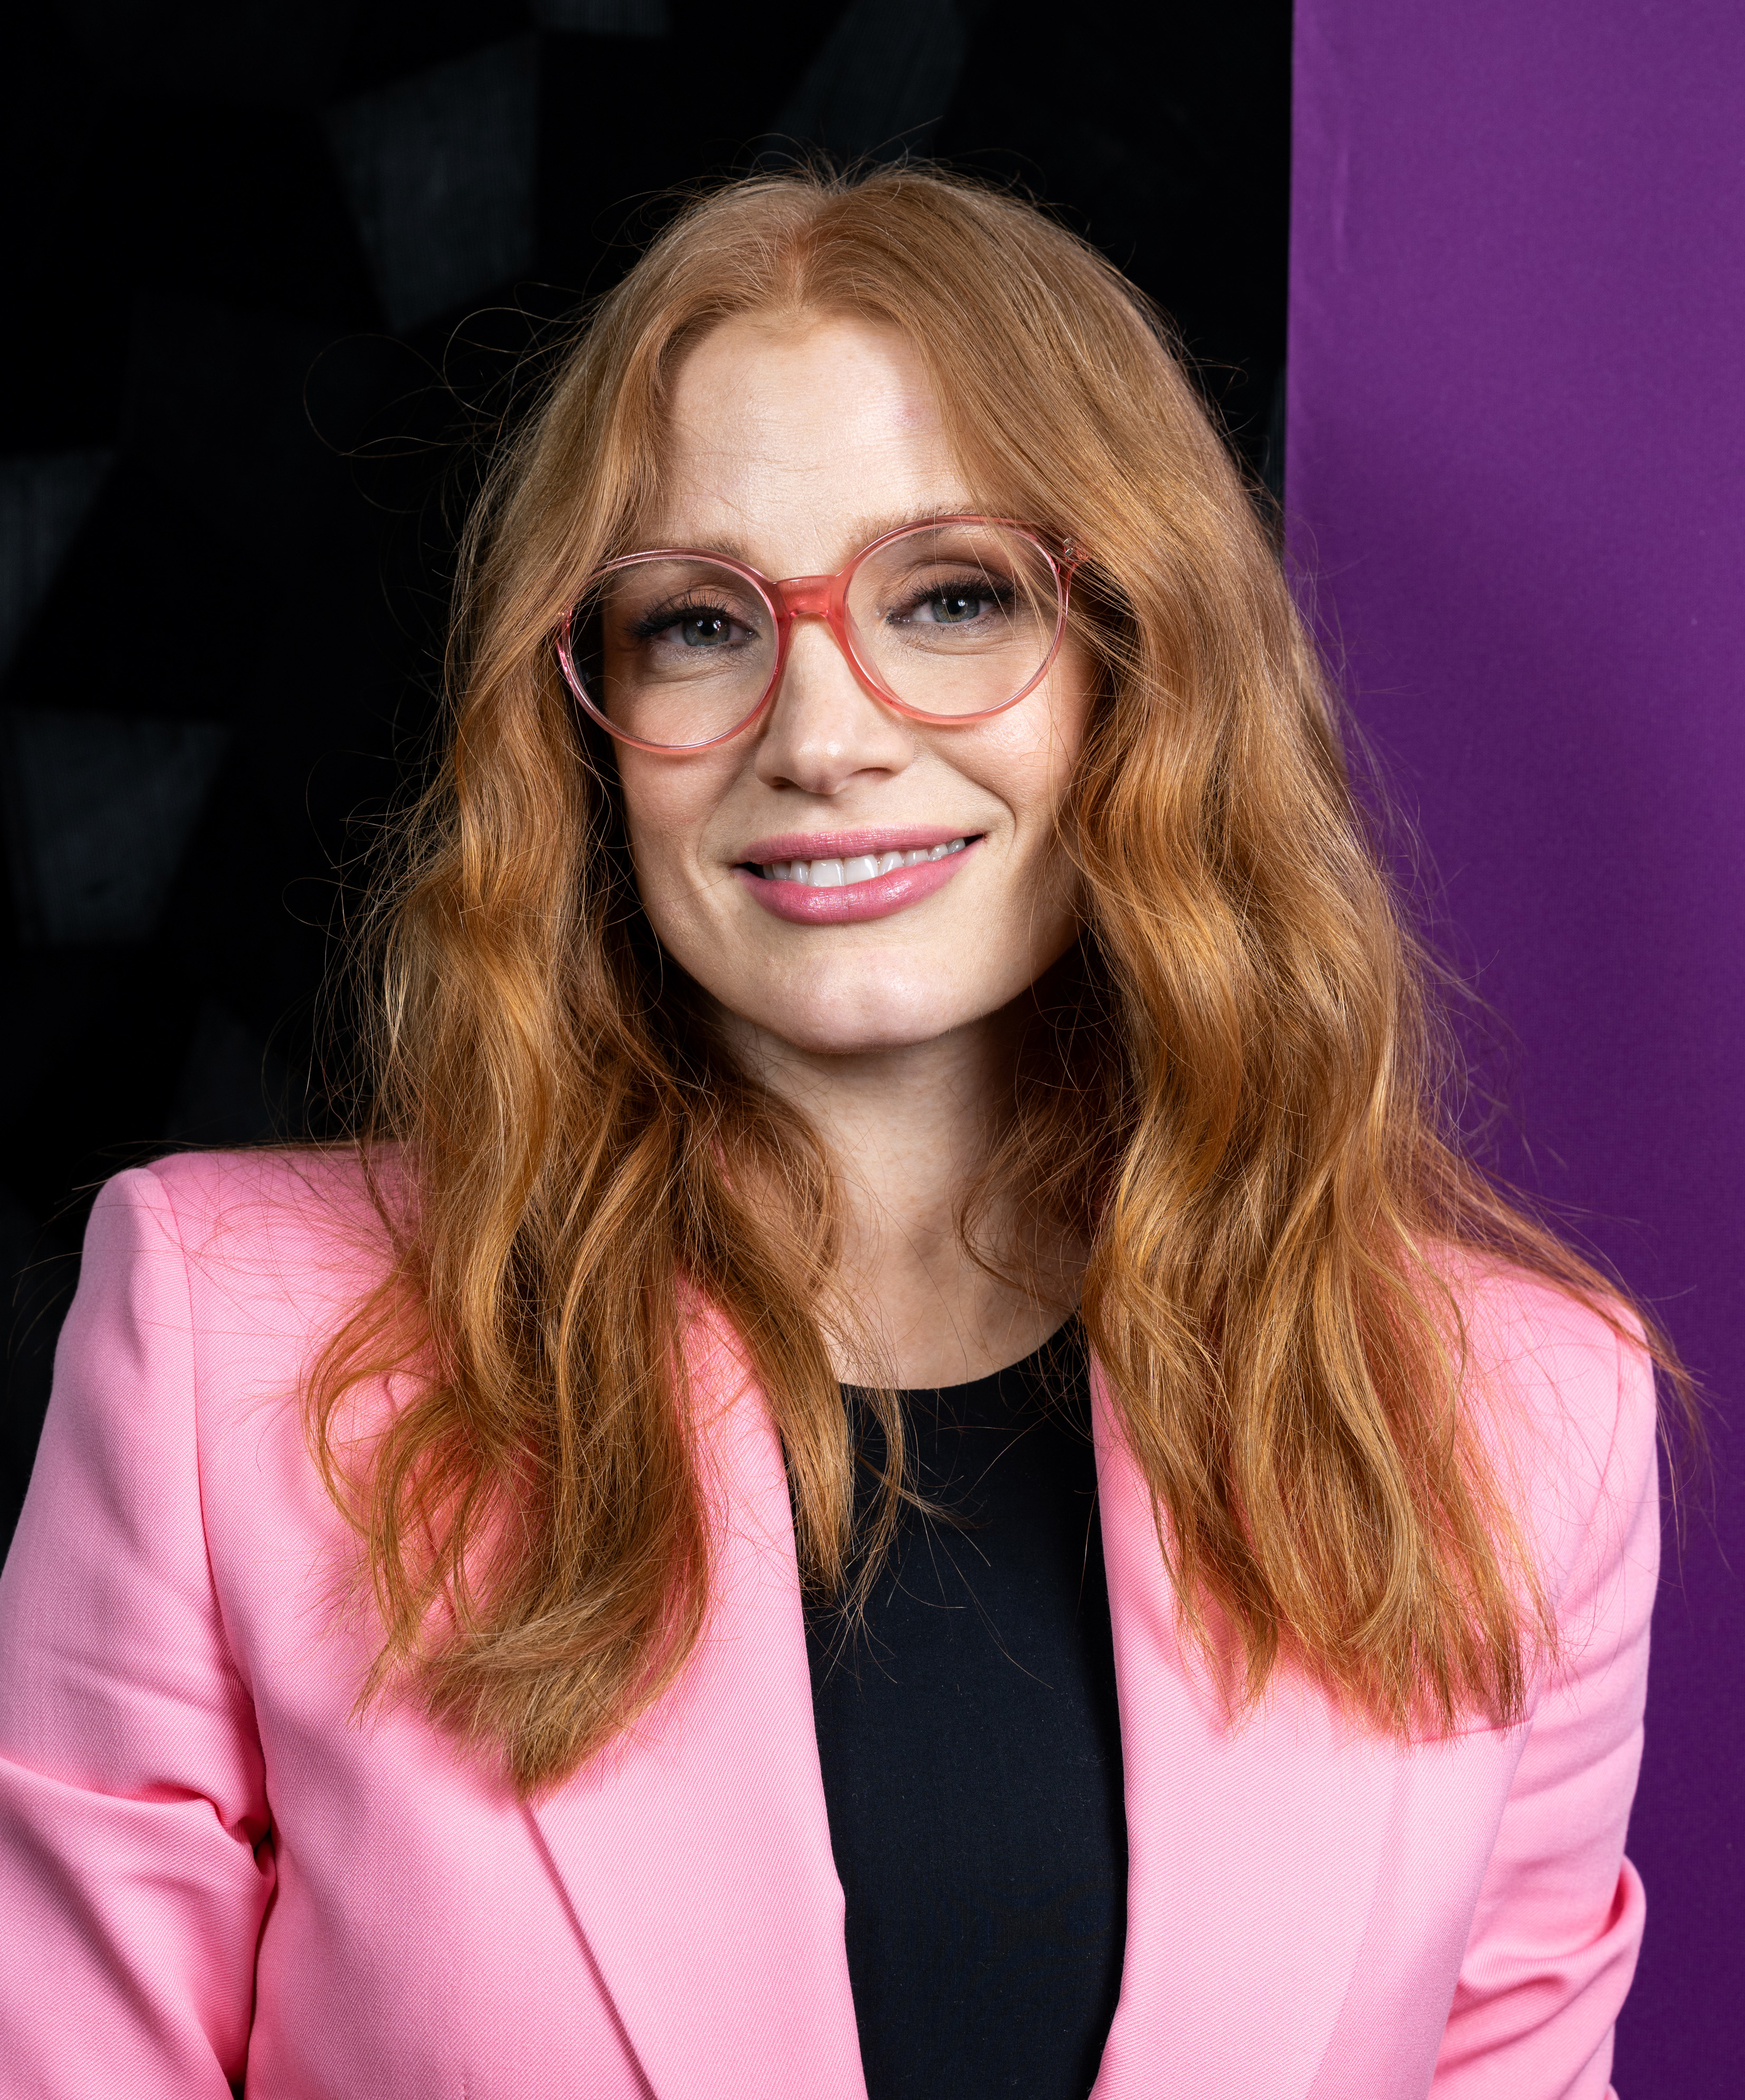 Close-up of Jessica smiling and wearing glasses and a suit jacket